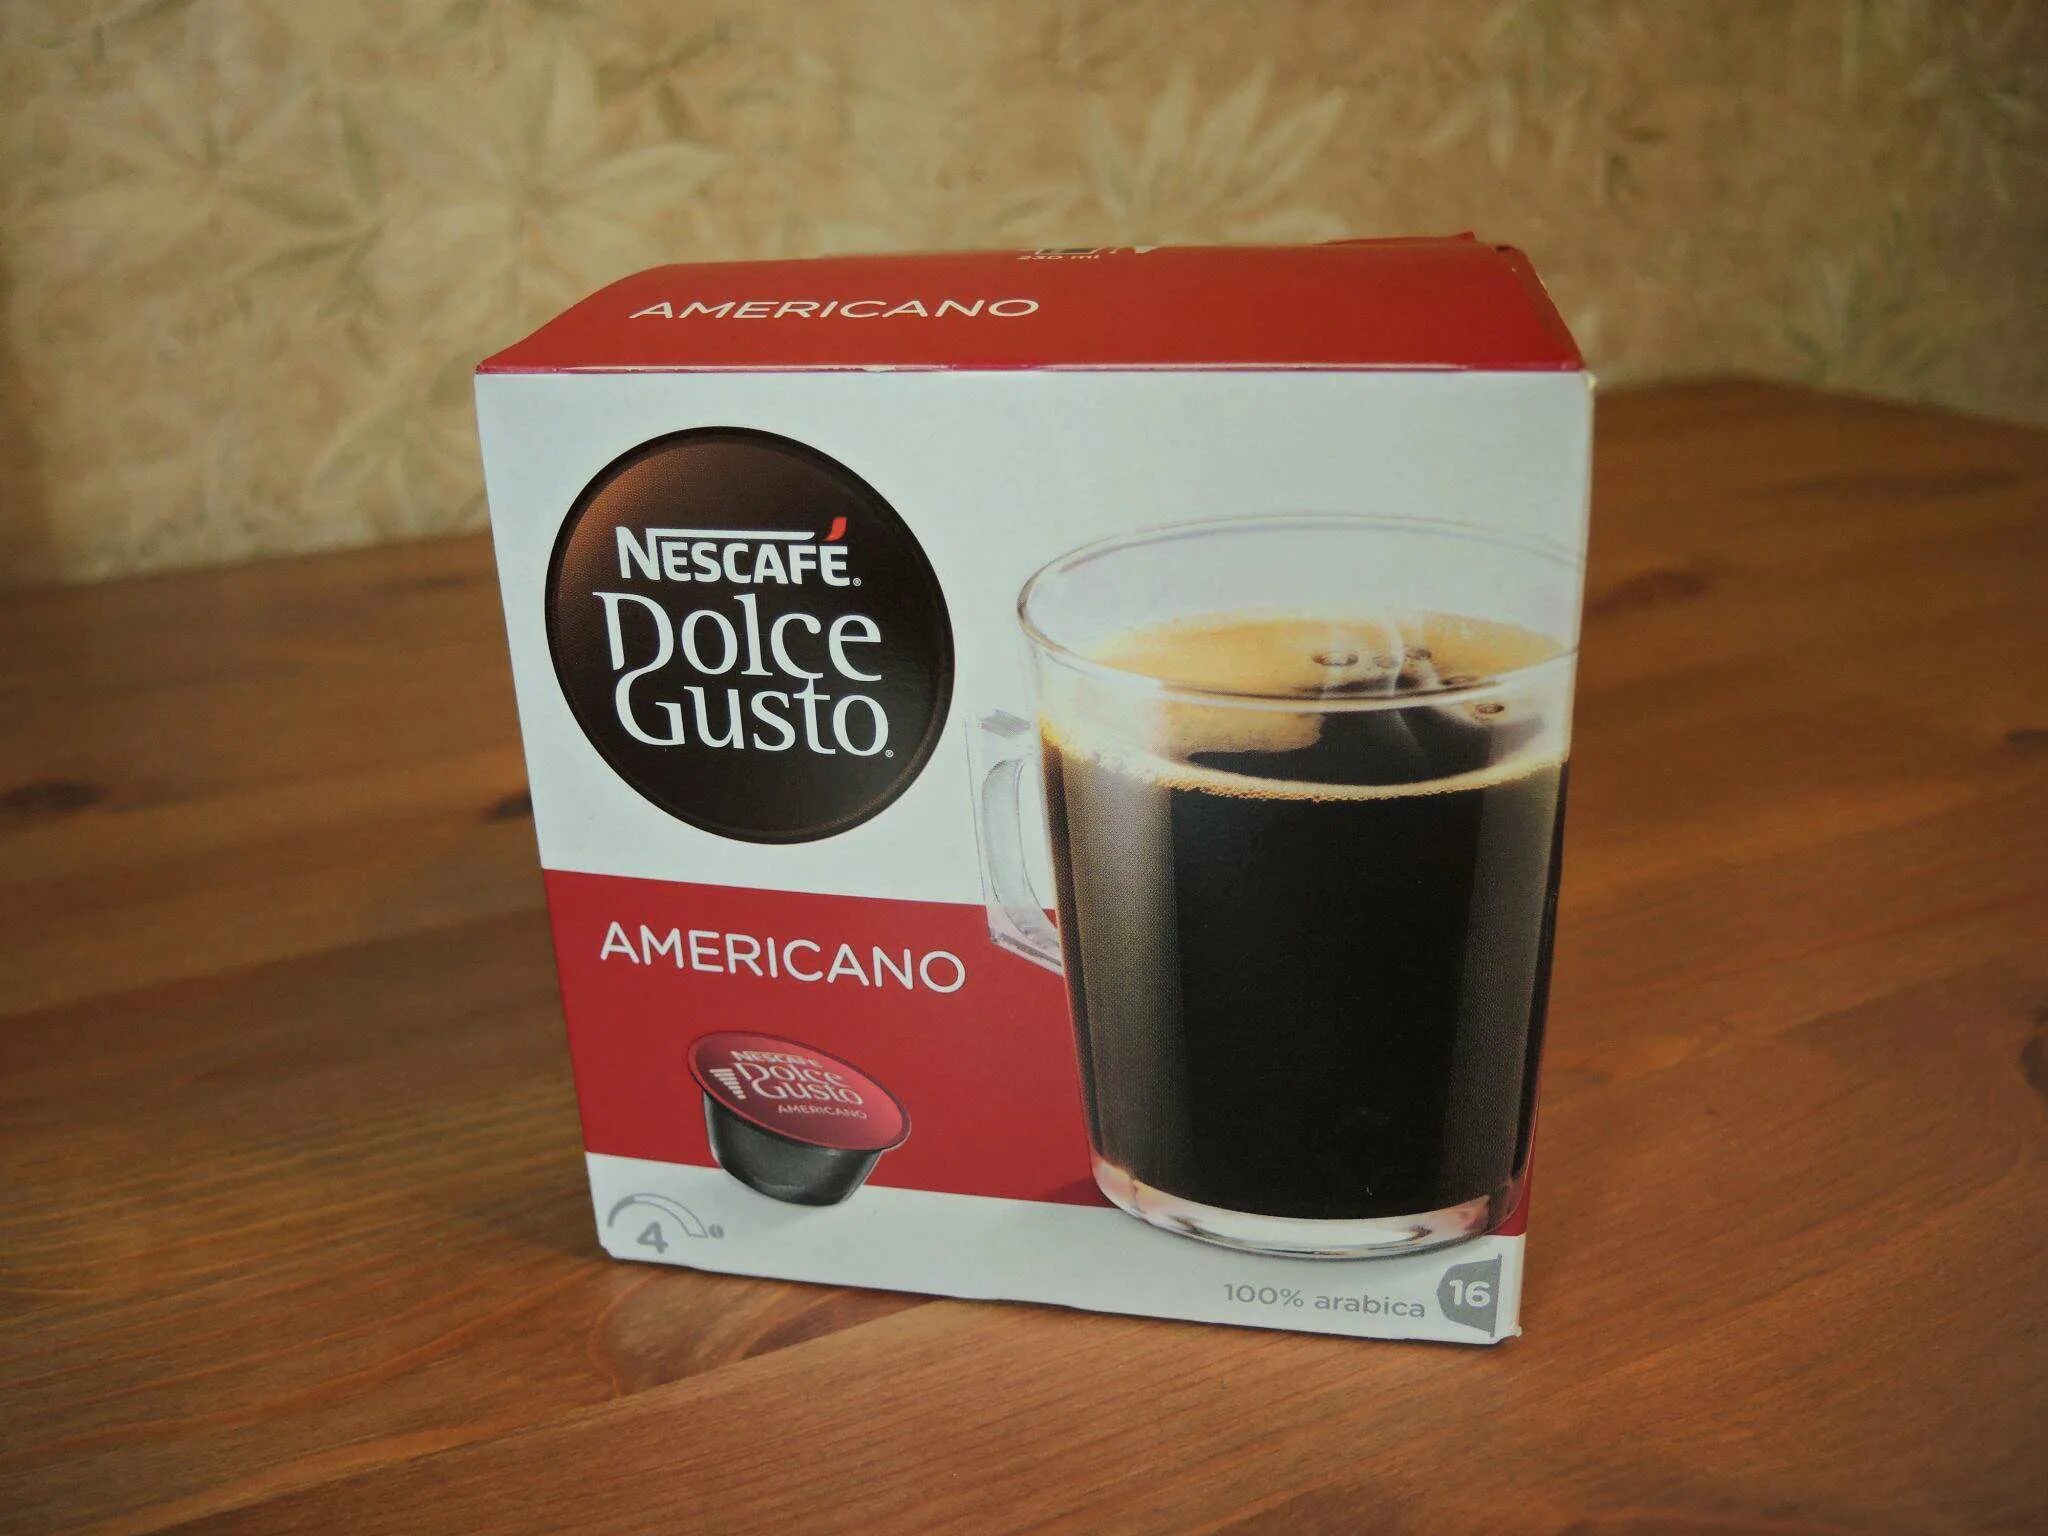 Dolce gusto americano. Дольче густо американо капсулы. Dolce gusto капсулы американо. Кофе в капсулах американо Дольче густо. Капсулы Нескафе Дольче густо американо.